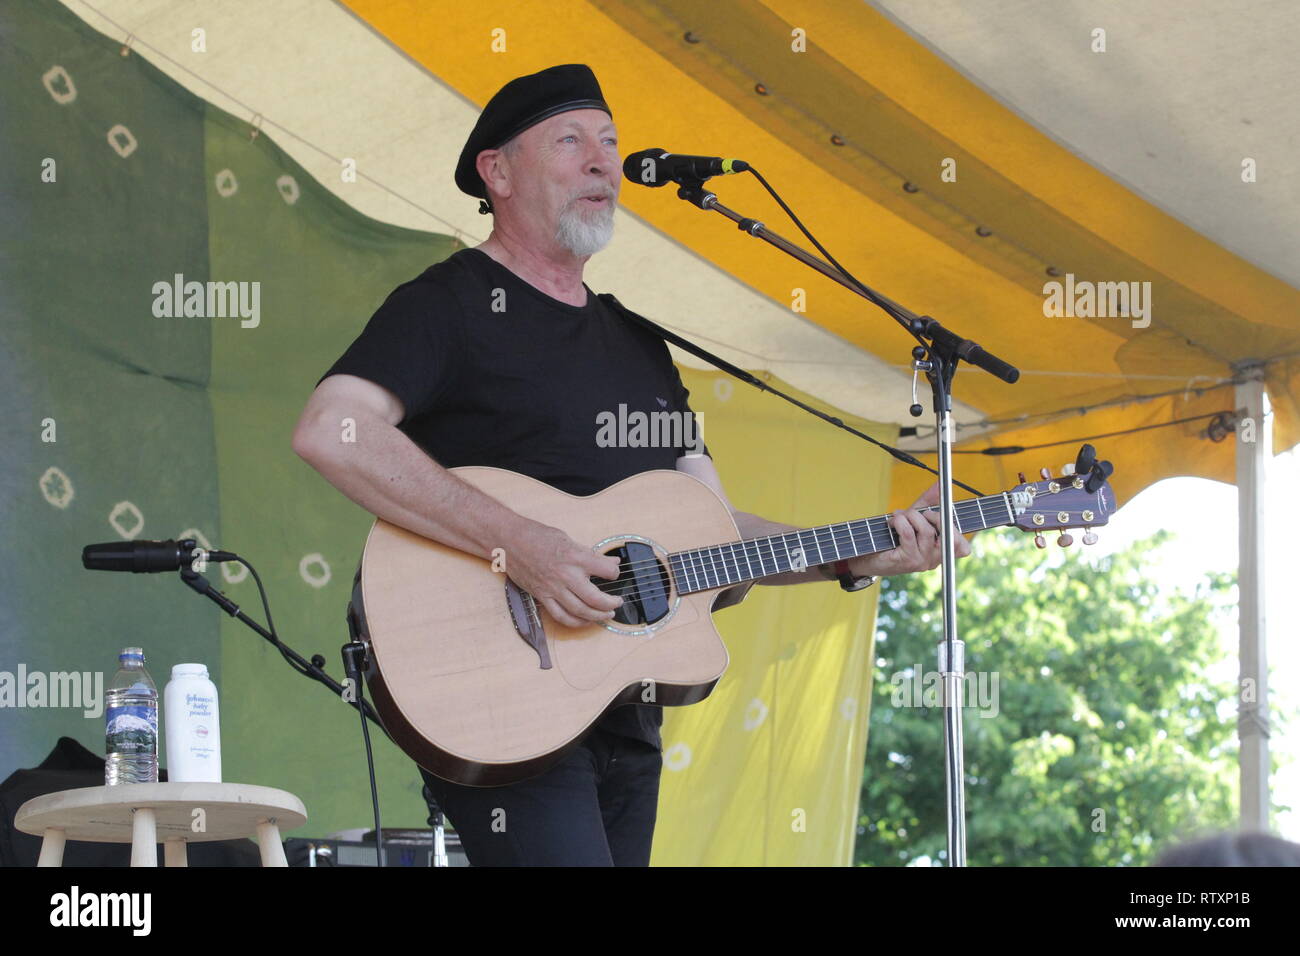 Singer, songwriter and guitarist Richard Thompson is shown performing on stage during 'live' concert appearance. Stock Photo